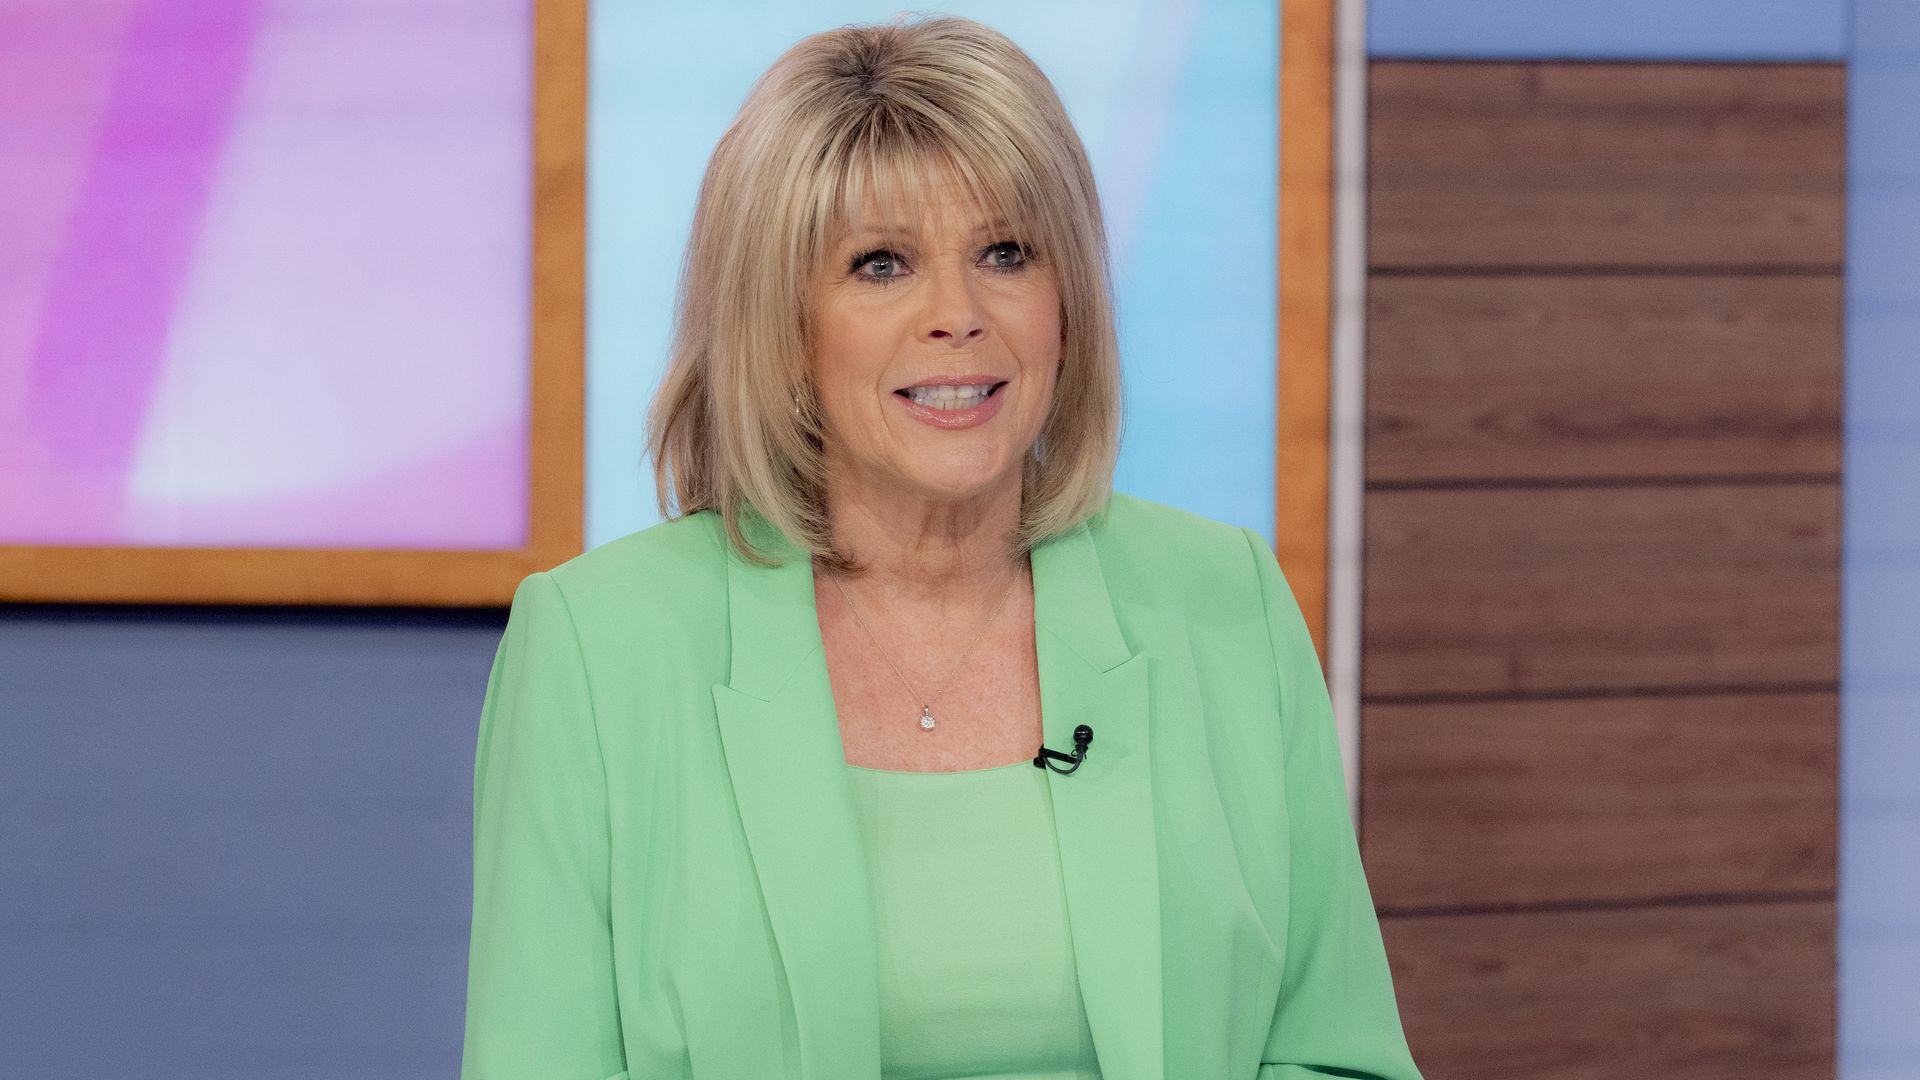 Ruth Langsford has been unwell